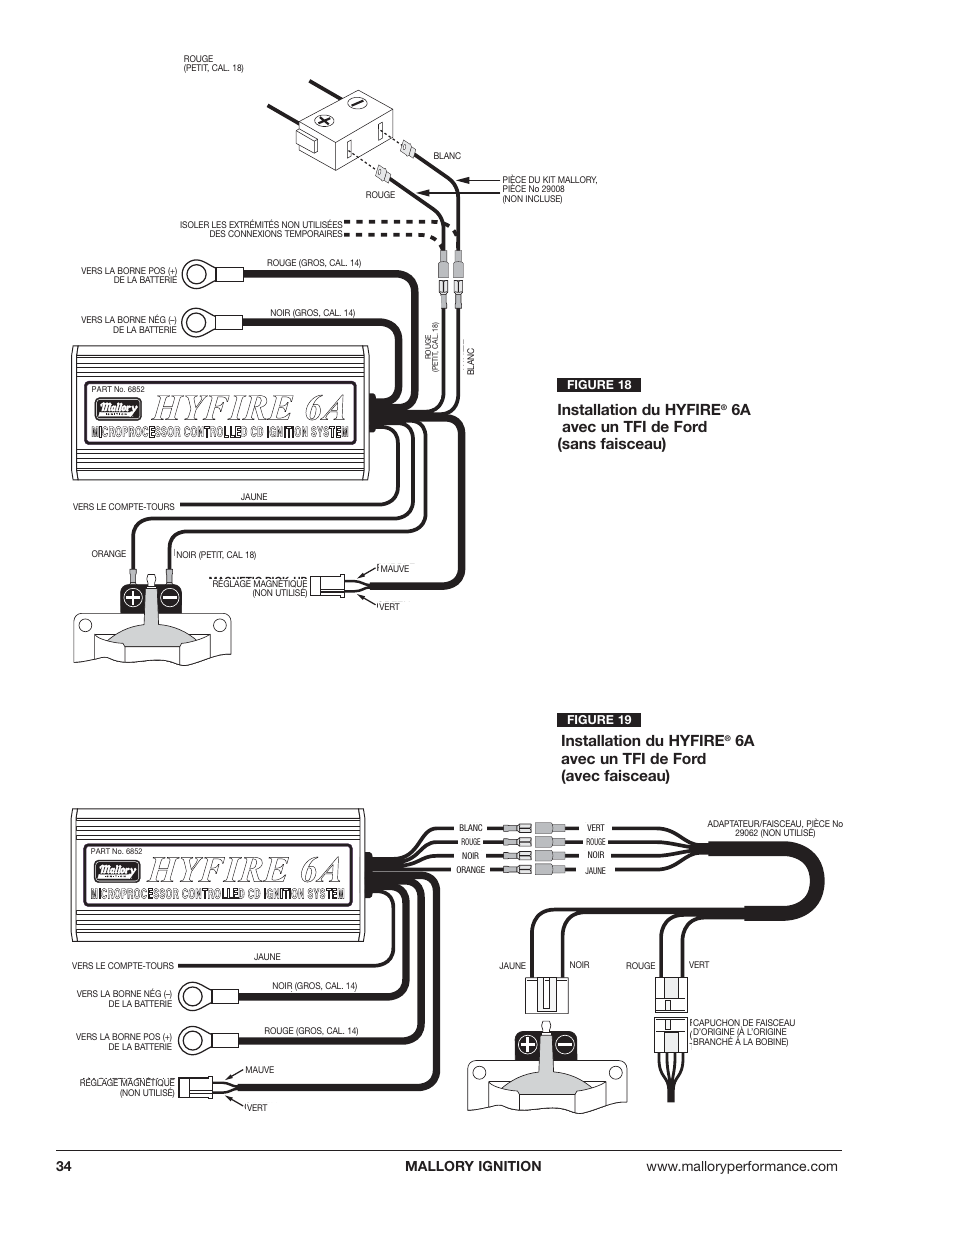 Mallory Ignition Coil Wiring Diagram from schematron.org